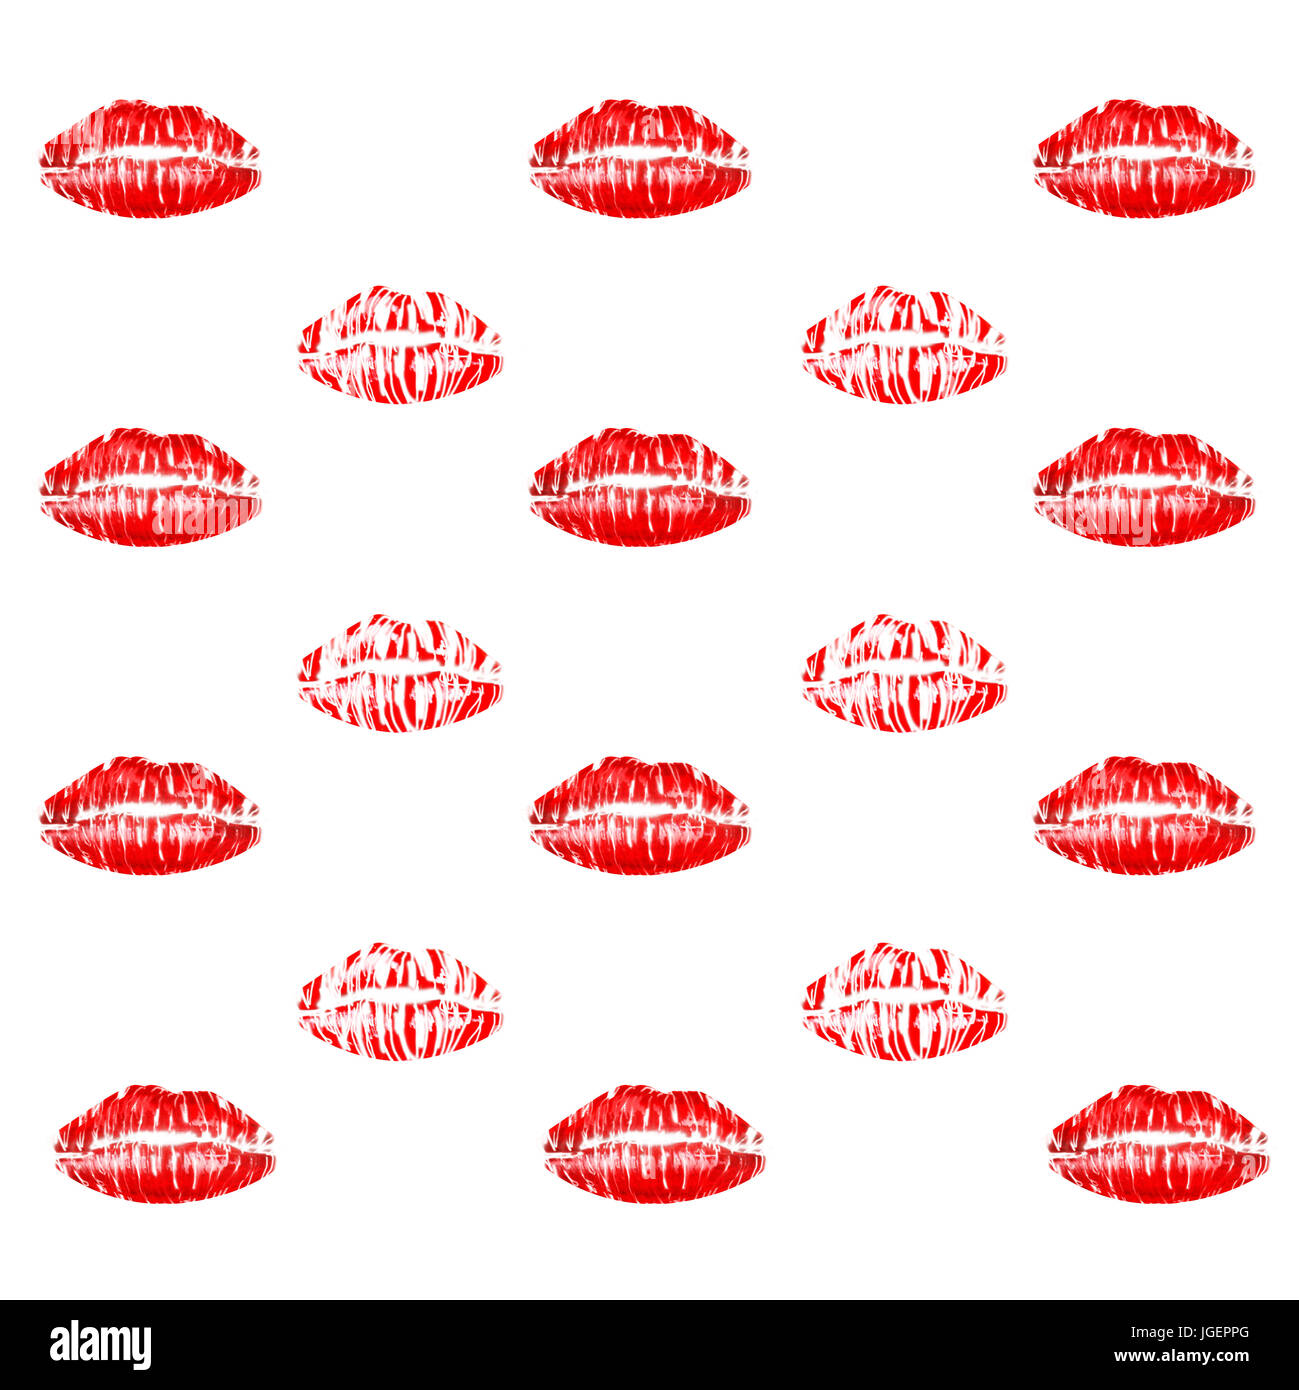 Red Lips kiss tendance marques Banque D'Images